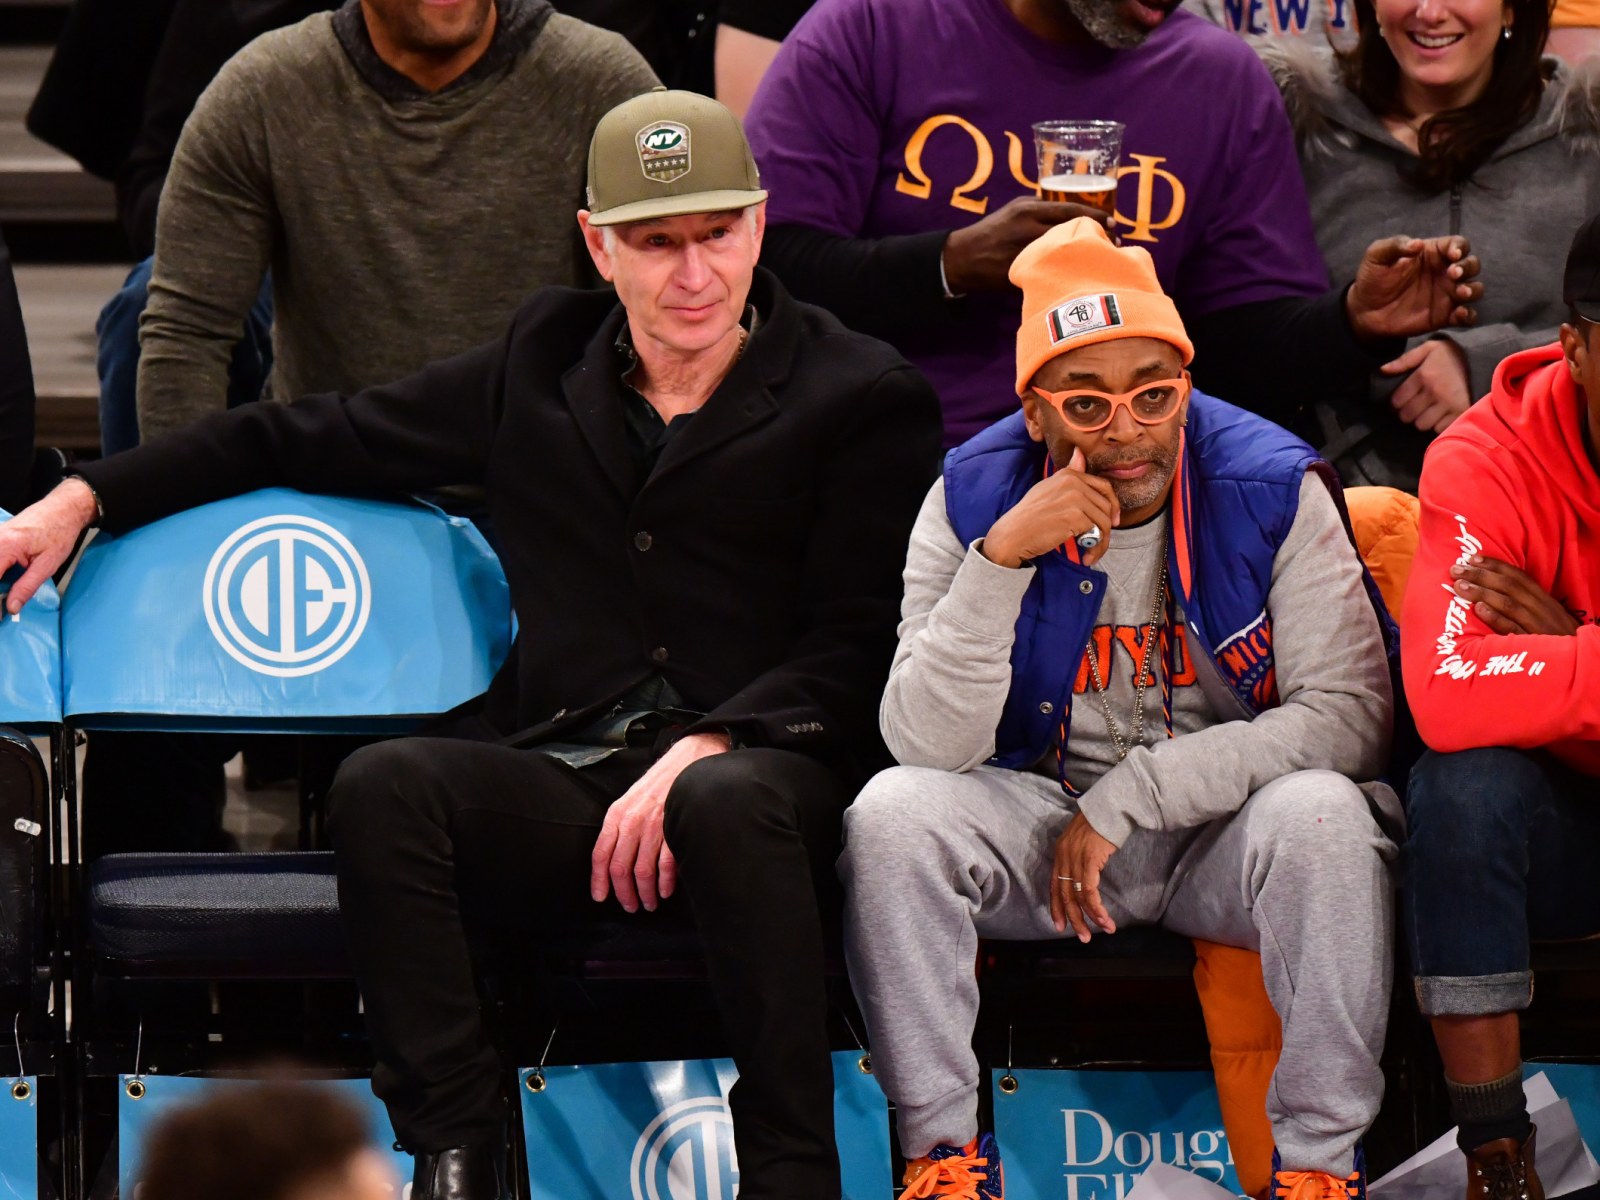 Spike Lee riles up controversy after cheering for Knicks' rival in playoffs